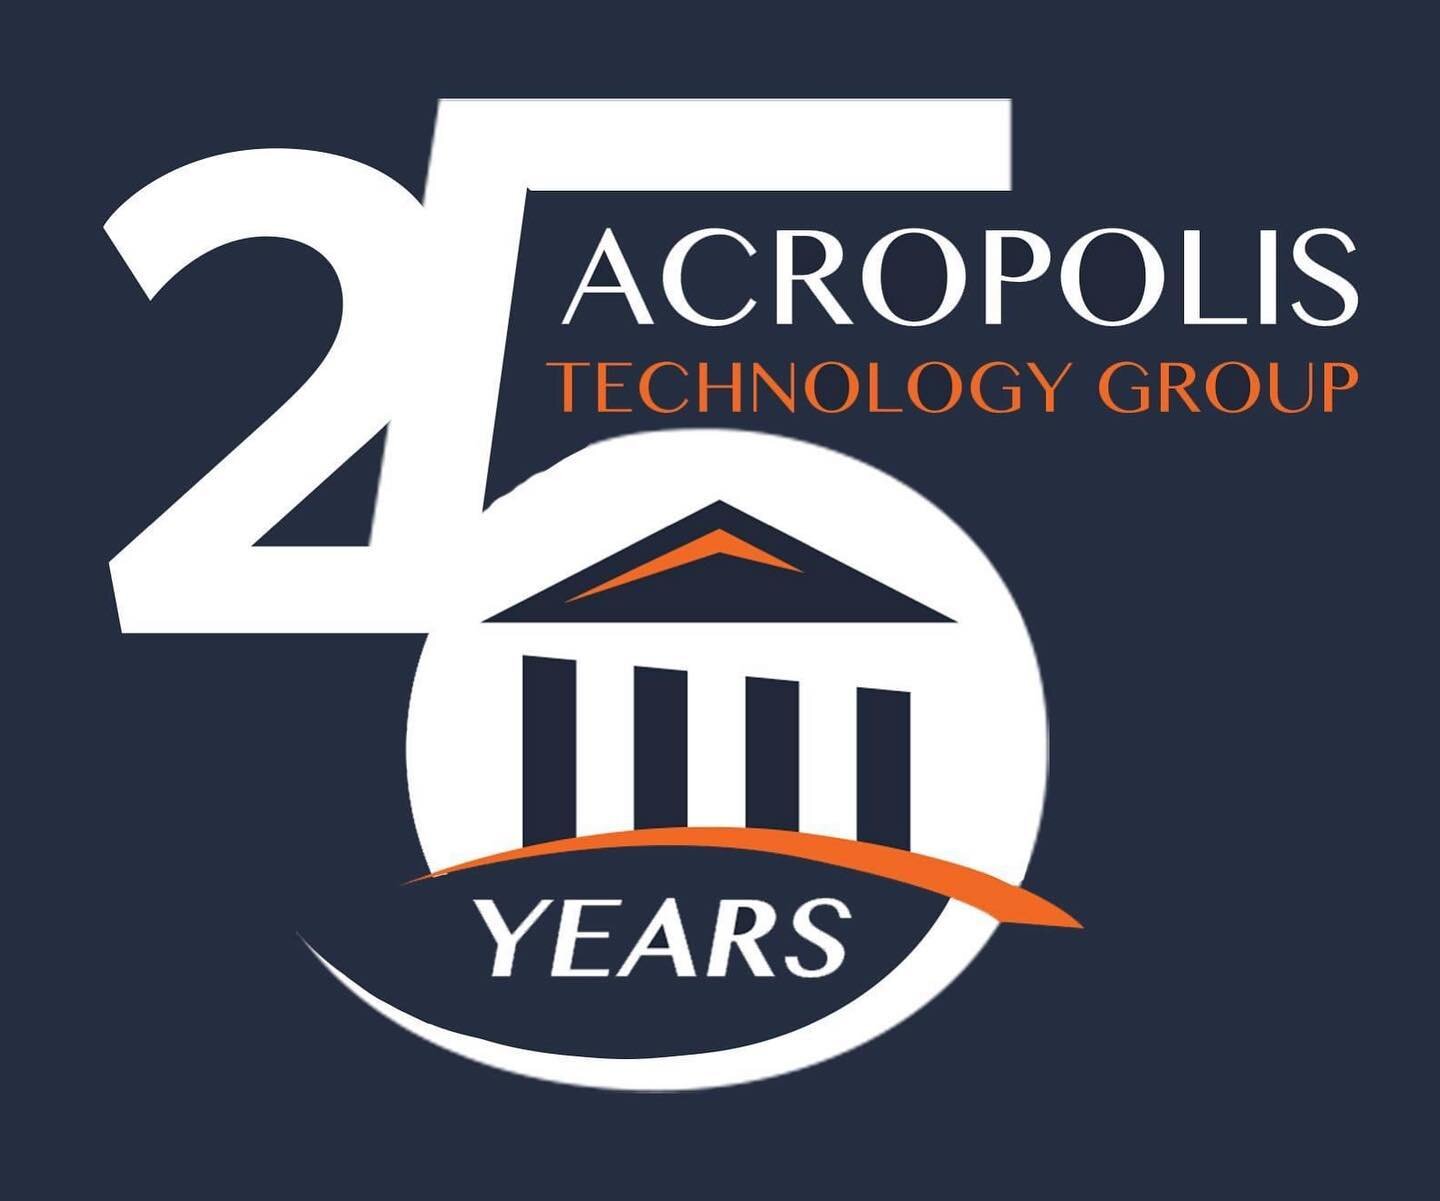 🎉 We are celebrating 25 years in business! 🎉 
Special thanks to our amazing clients and employees for making this place so great. Cheers to many more! 🥂 
#25yearsinbusiness #acropolistech #goingstrong #newlogo